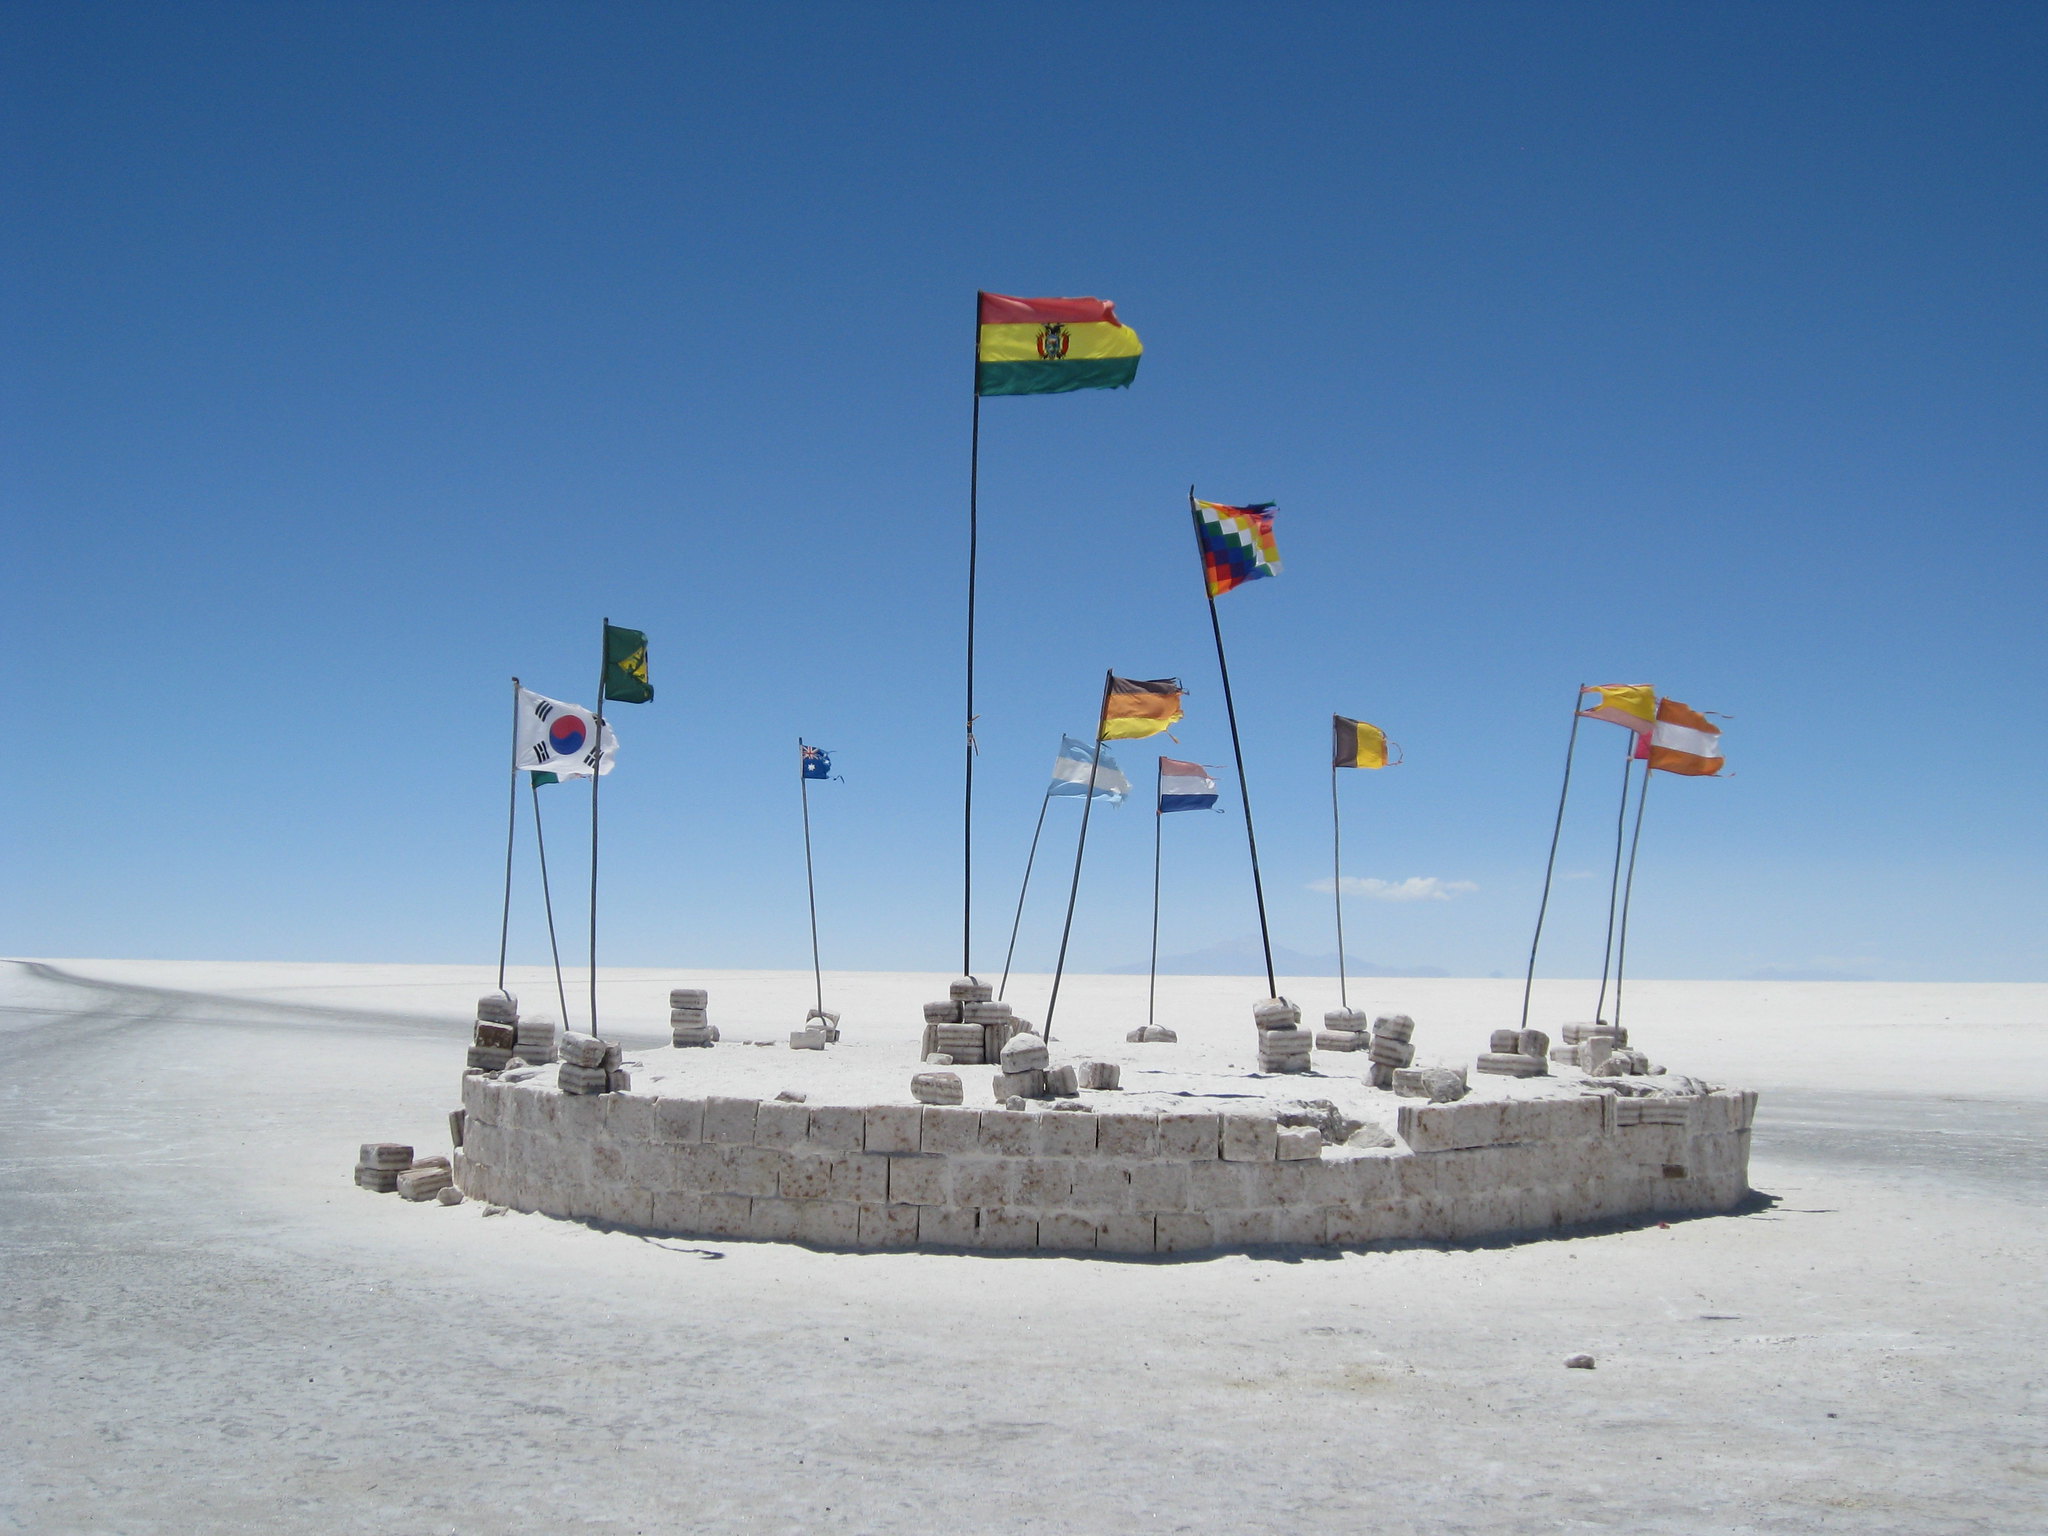 My Bolivia Journey - Dispelled Myths and New Discoveries @BolTurOficial